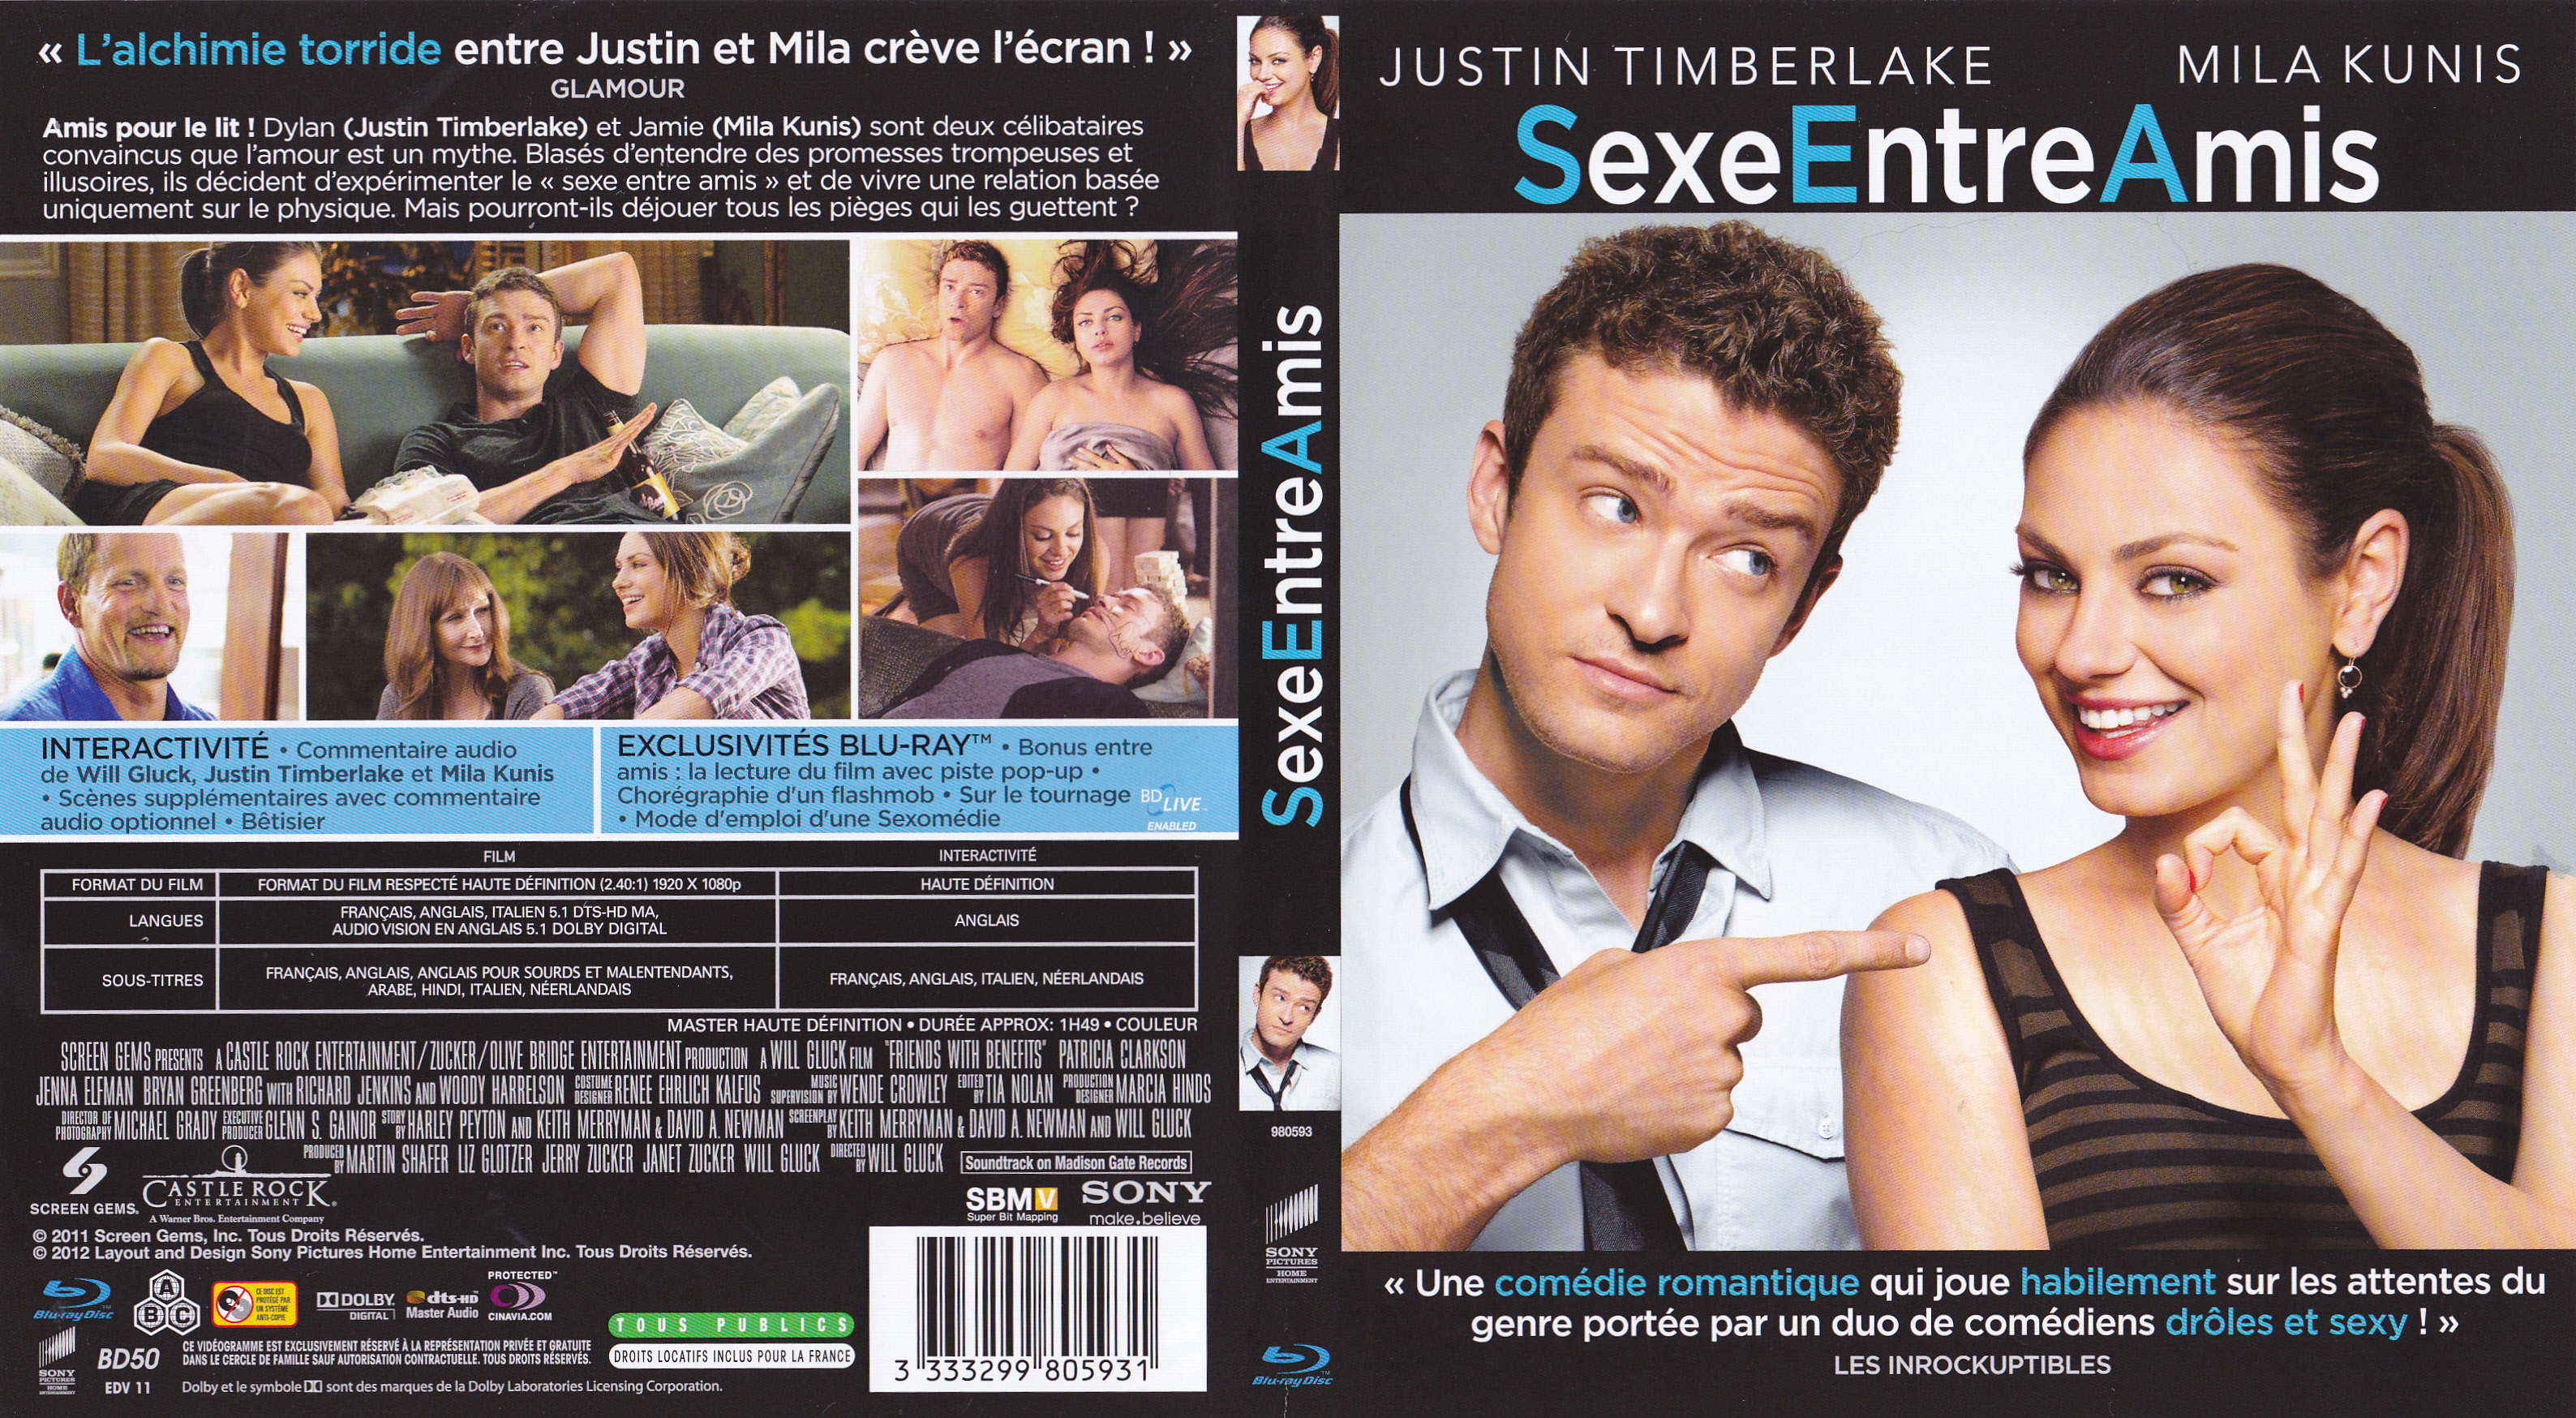 Jaquette DVD Sexe entre amis (BLU-RAY)